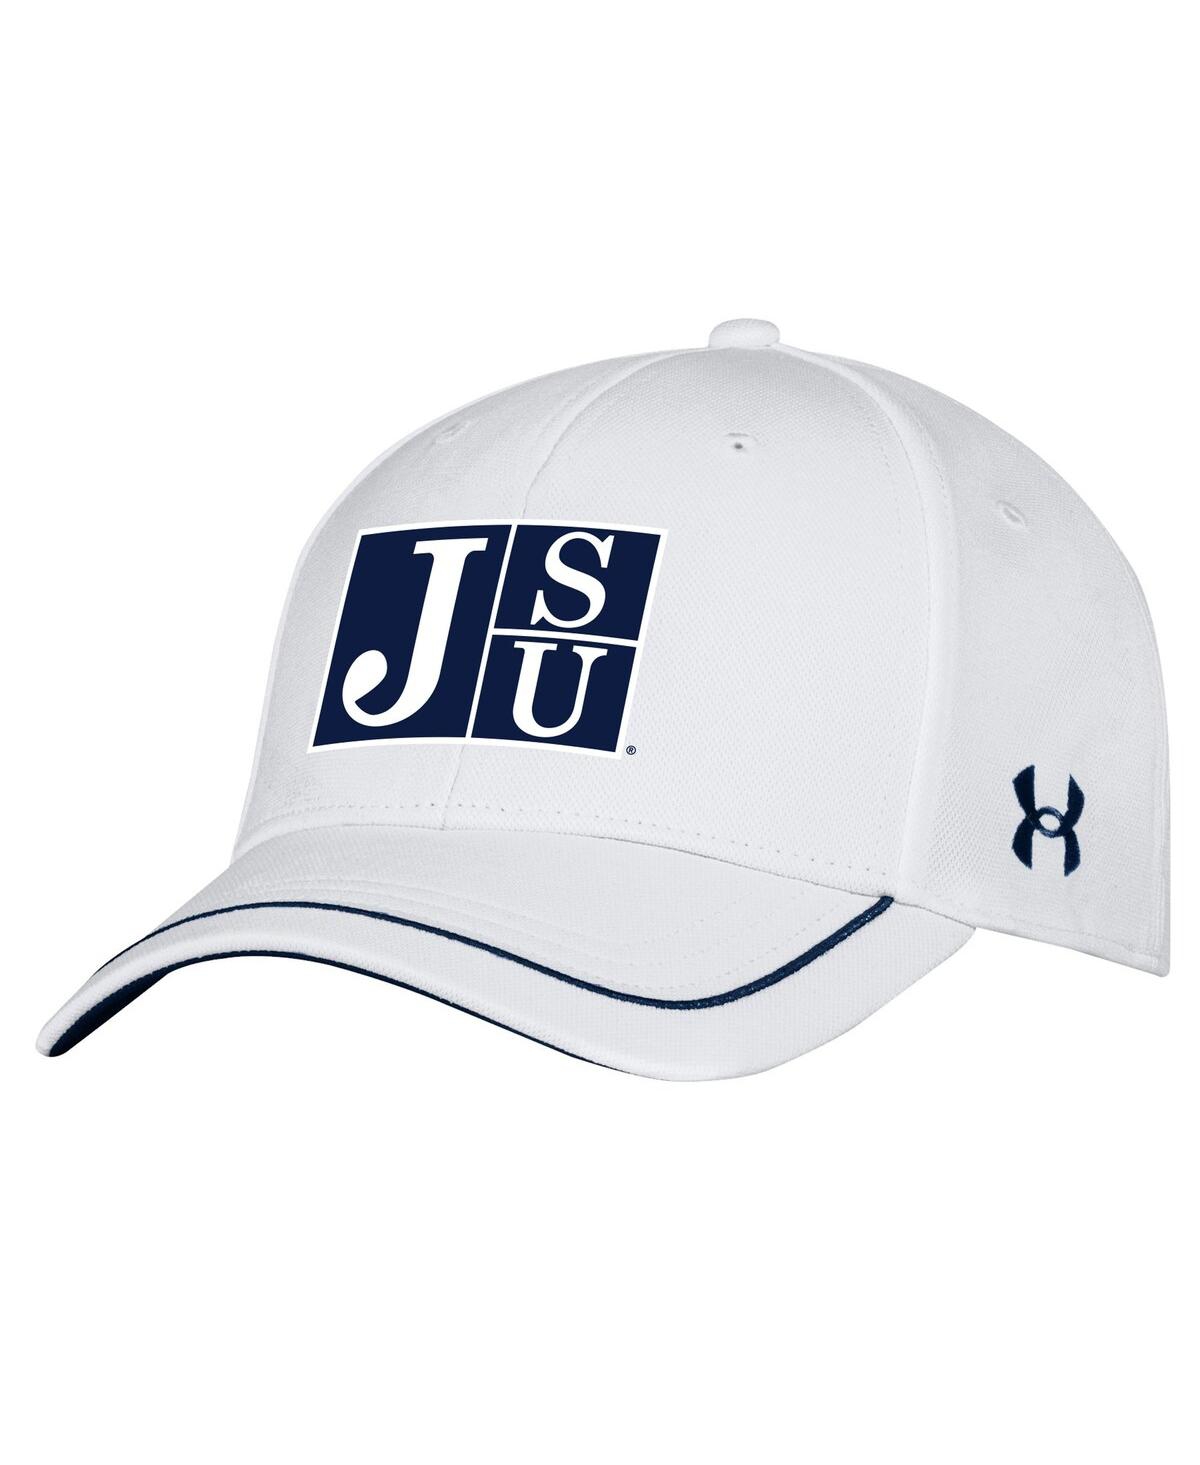 UNDER ARMOUR MEN'S UNDER ARMOUR WHITE JACKSON STATE TIGERS BLITZING ACCENT ISO-CHILL ADJUSTABLE HAT